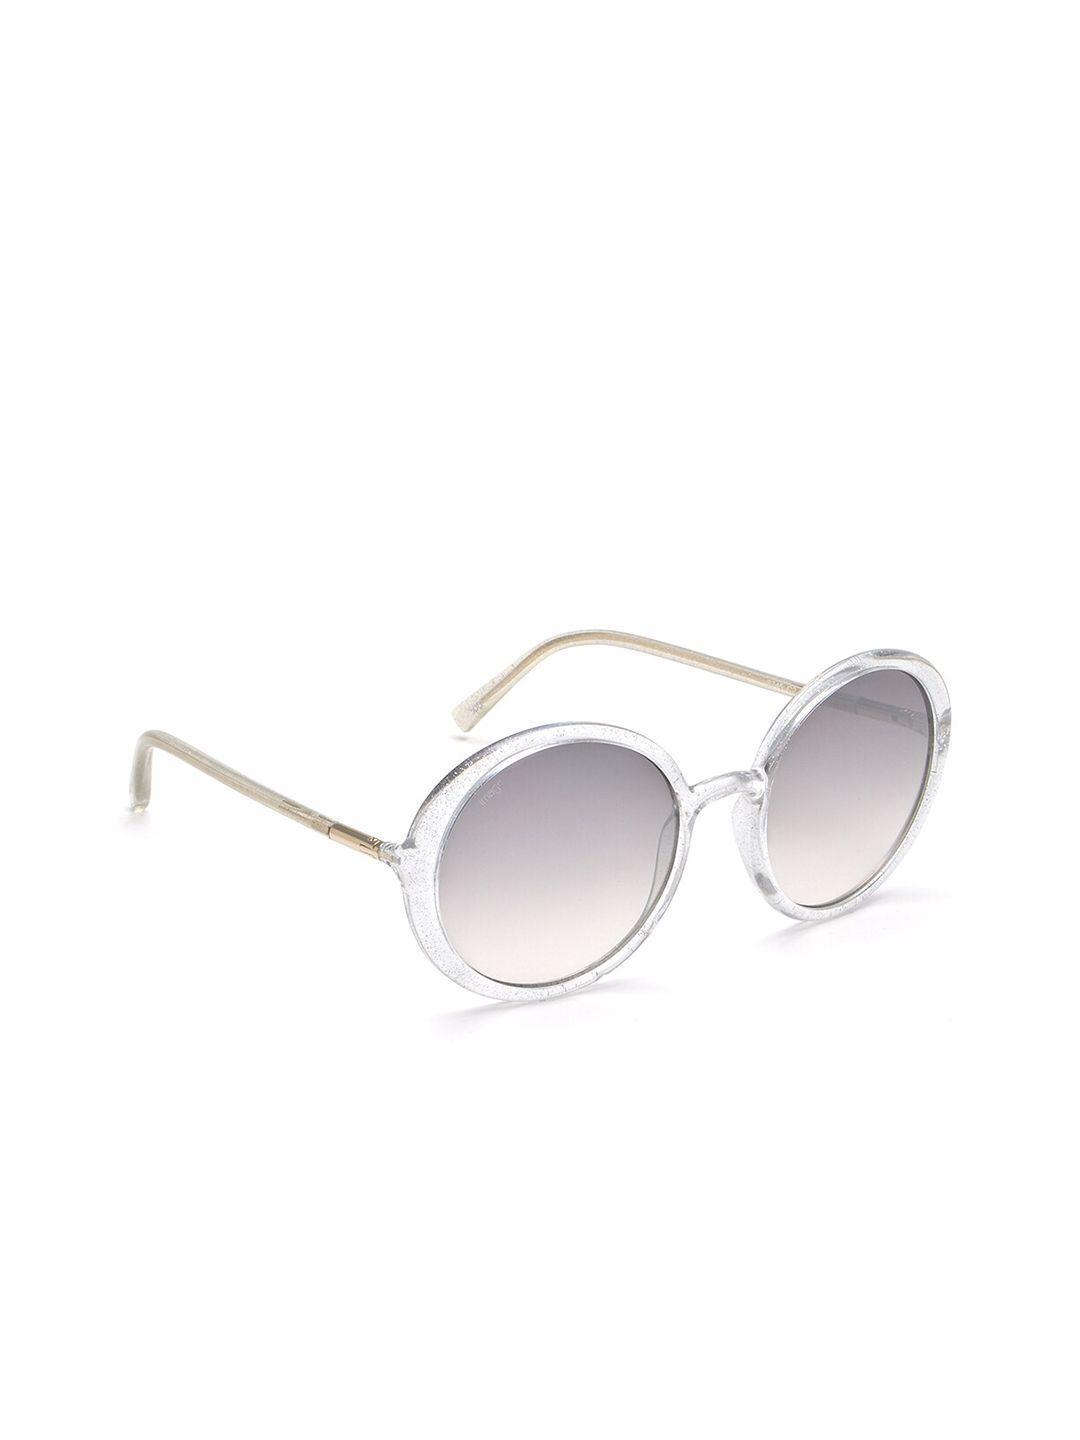 image-women-grey-lens-&-silver-toned-round-sunglasses-with-polarised-lens-ims745c2sg